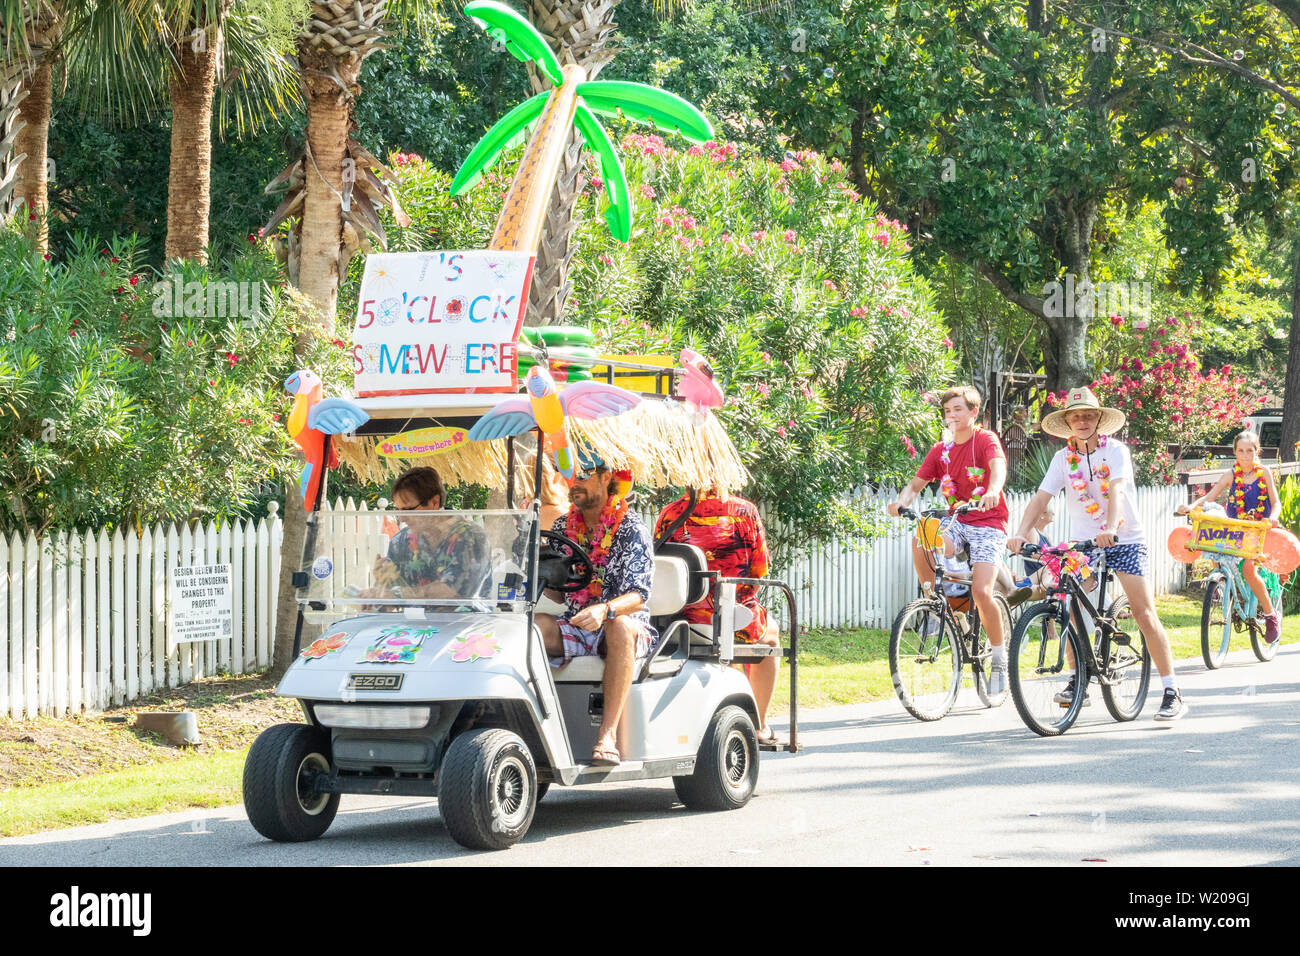 Sullivans Island South Carolina, USA. 4th July, 2019. Golf cart floats decorated in tropical style during the annual Independence Day parade July 4, 2019 in Sullivan's Island, South Carolina. The tiny Sea Island beach community across from Charleston, was once a quarantine station for enslaved Africans, and is now one of the most affluent, least diverse communities with one of highest per capita real estate costs in the United States. Credit: Planetpix/Alamy Live News Stock Photo